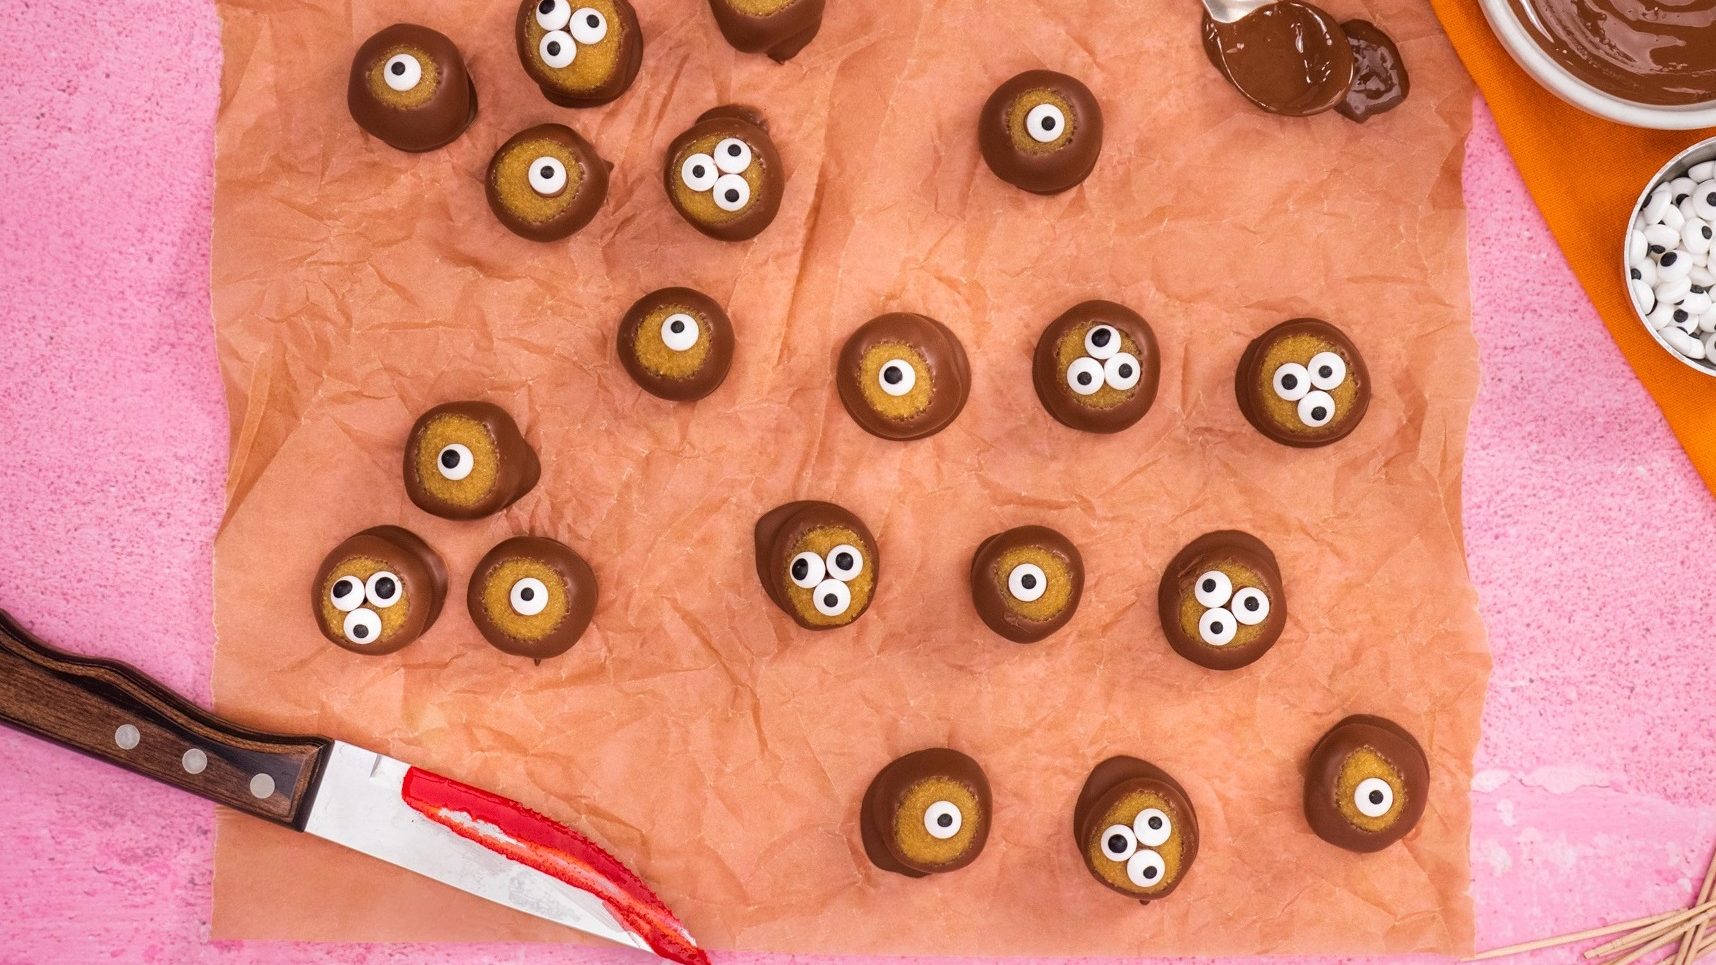 Chocolate dipped Halloween eyeballs treats on baking paper with a knife smeared with red jam.